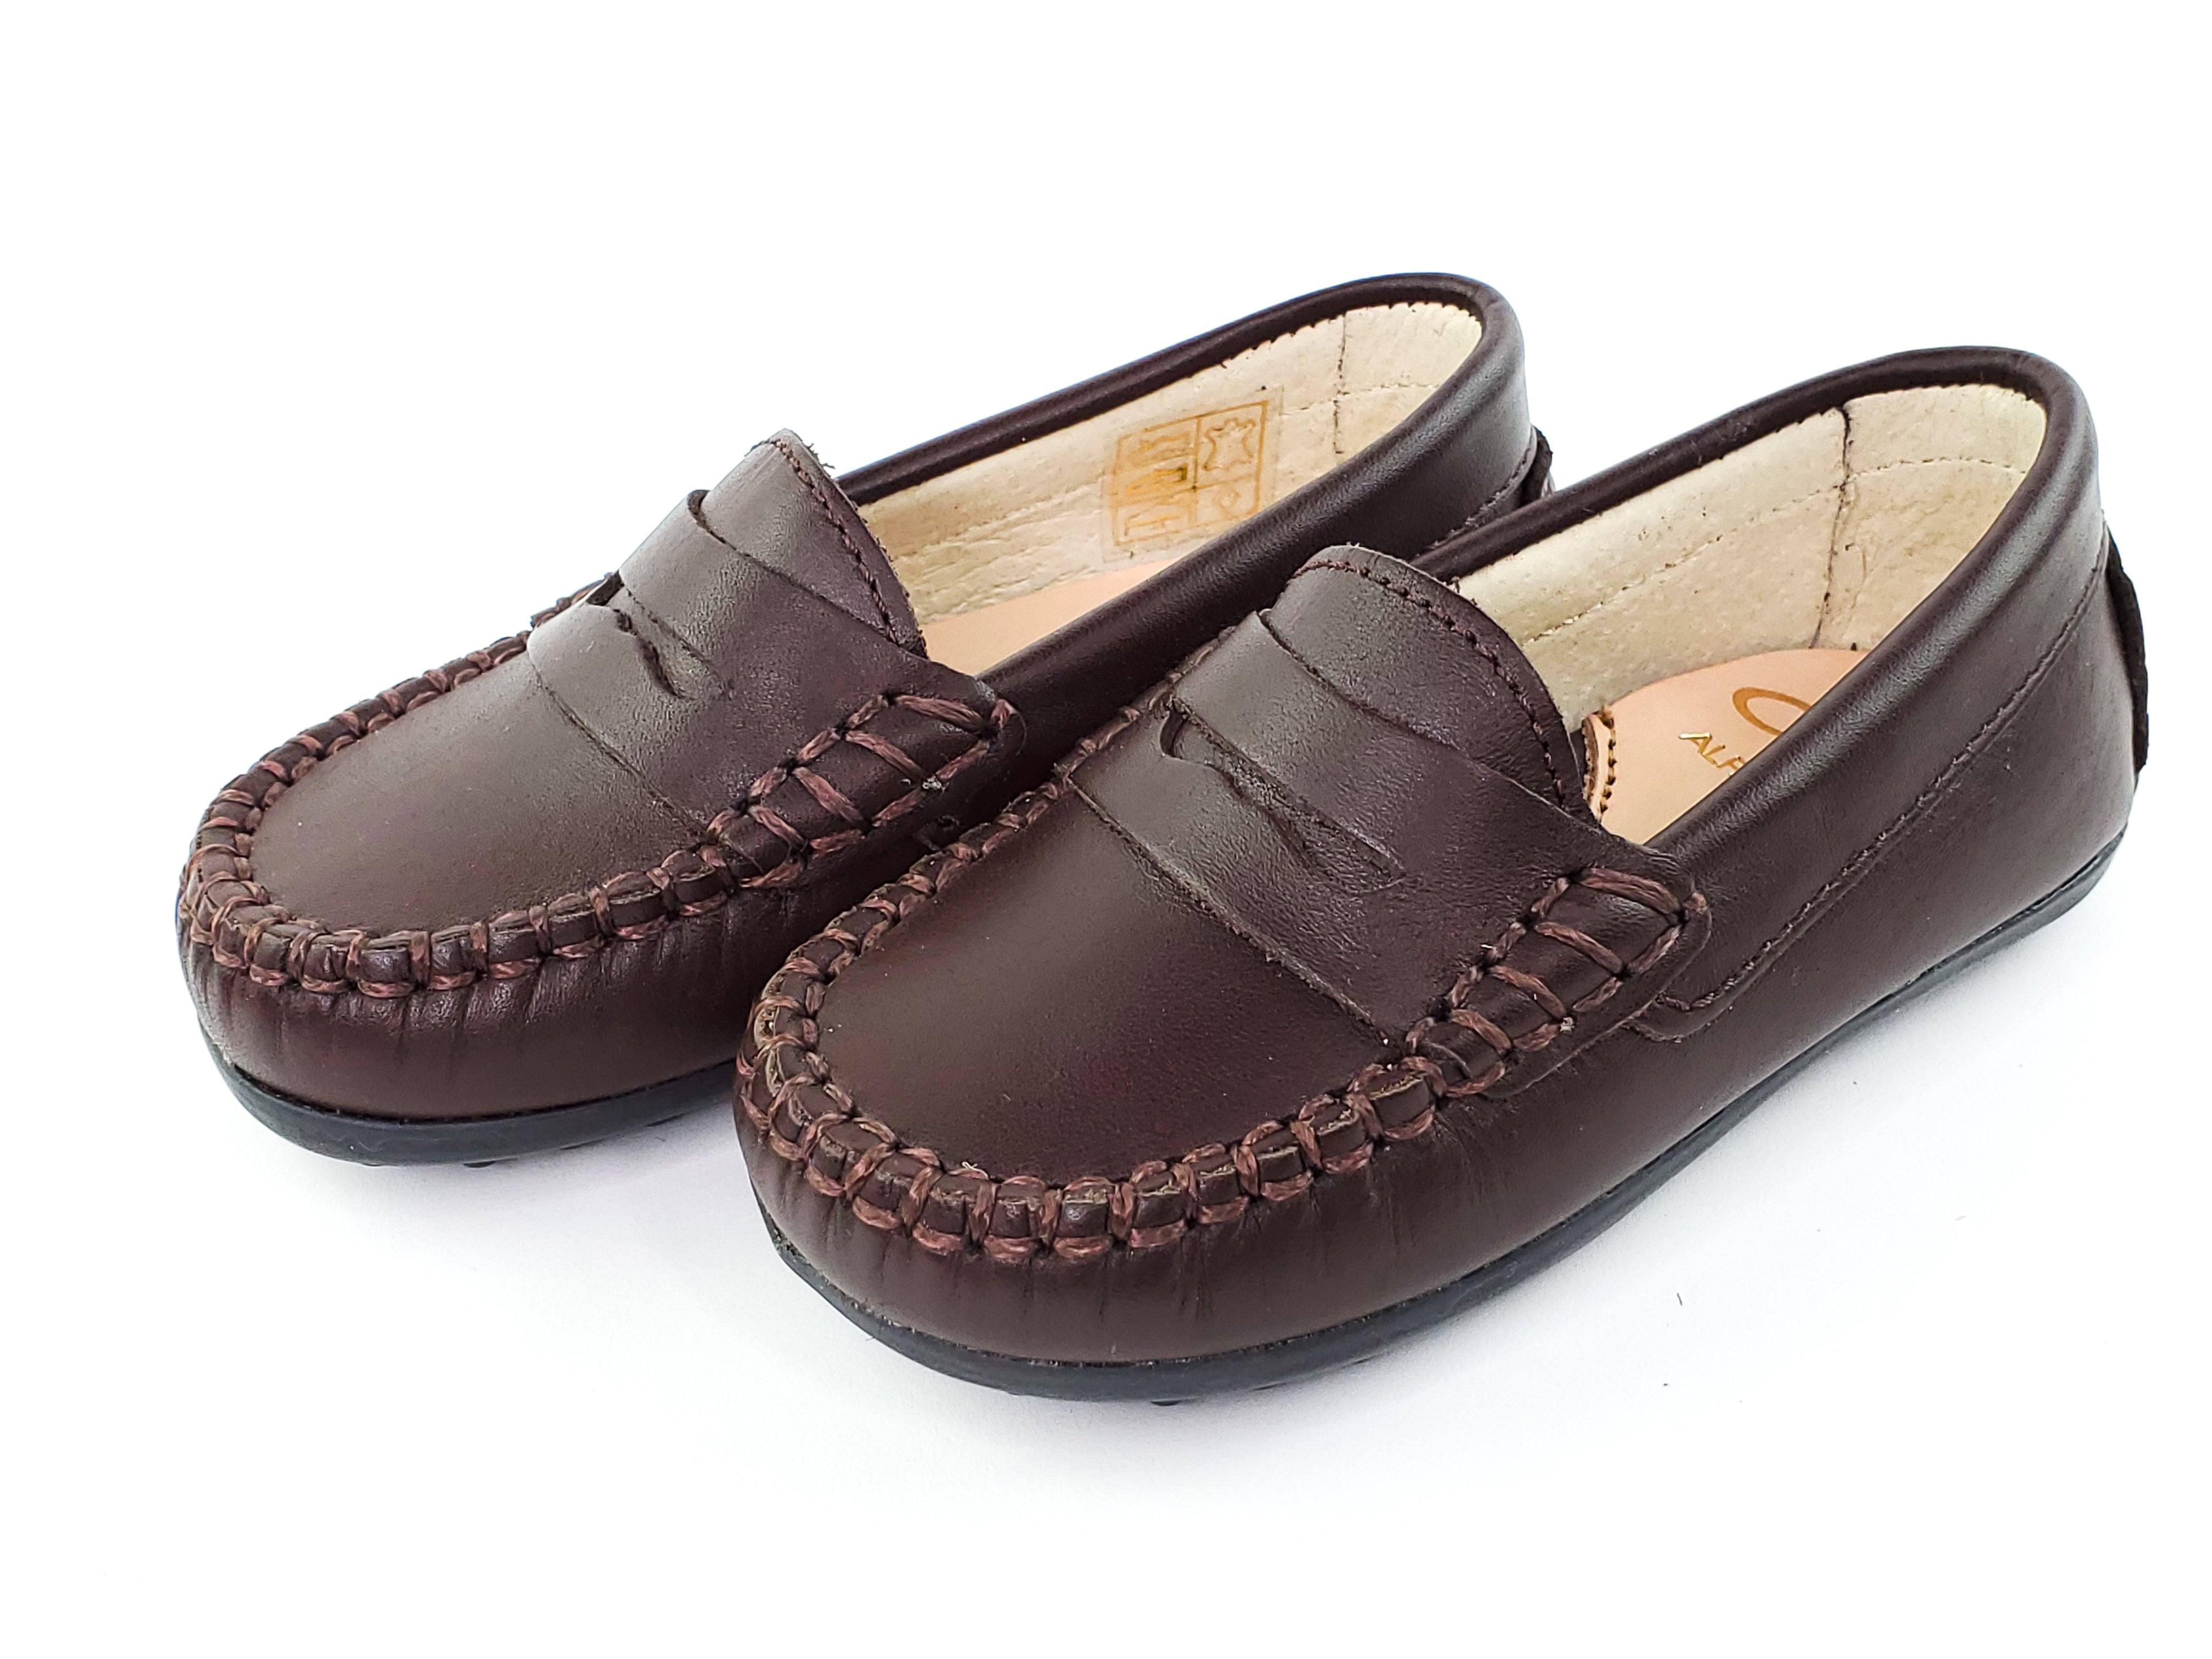 Classic Brown Napa Leather Boy's Moccasins Shoes-Boy's Shoes- Boy's Shoes Store Boys Shoes Alfa Baby Boutique 